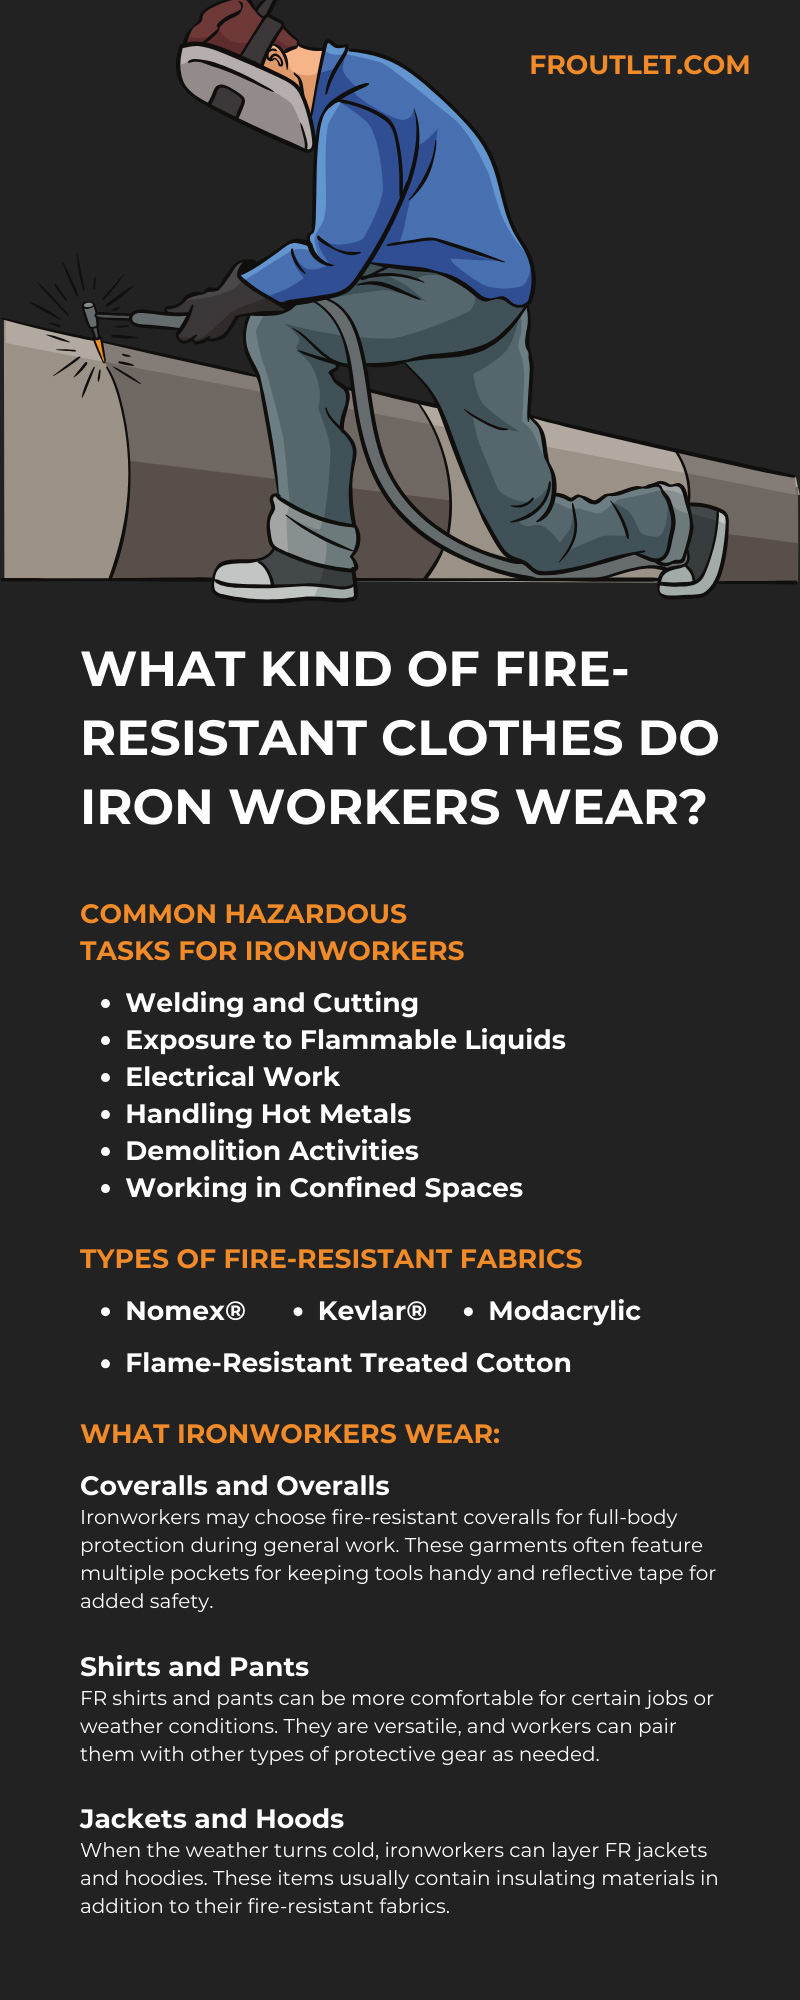 What Kind of Fire-Resistant Clothes Do Iron Workers Wear?